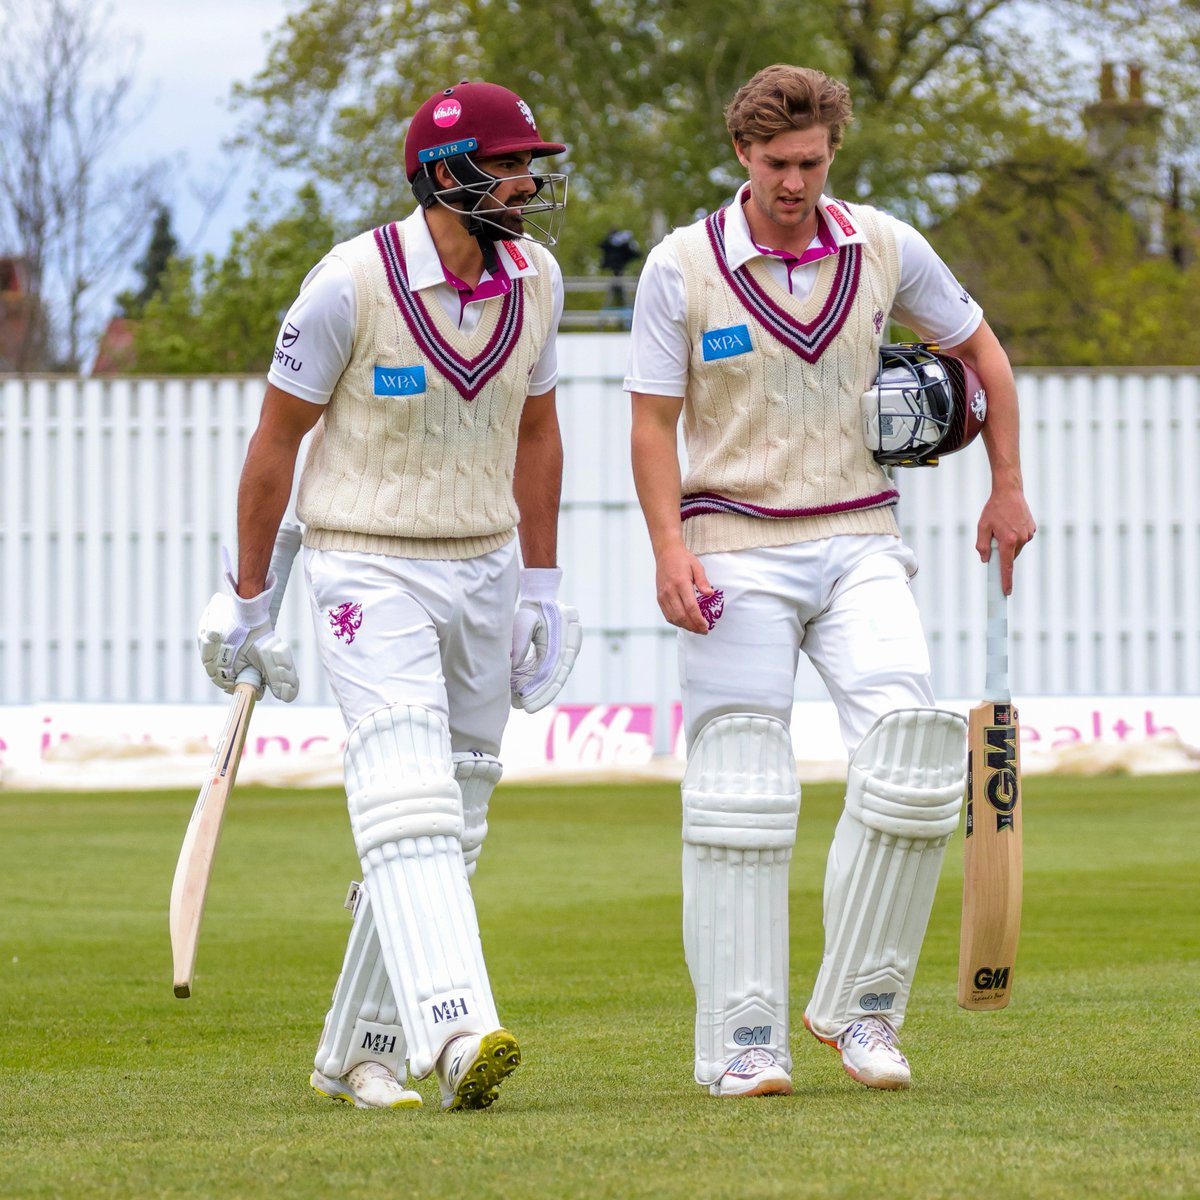 TEA: A solid session from these two 🧱 🏏 Lammonby 52* (126) 🏏 Umeed 41* (99) Somerset 141/3, trail by 1 #WORCvSOM #WeAreSomerset